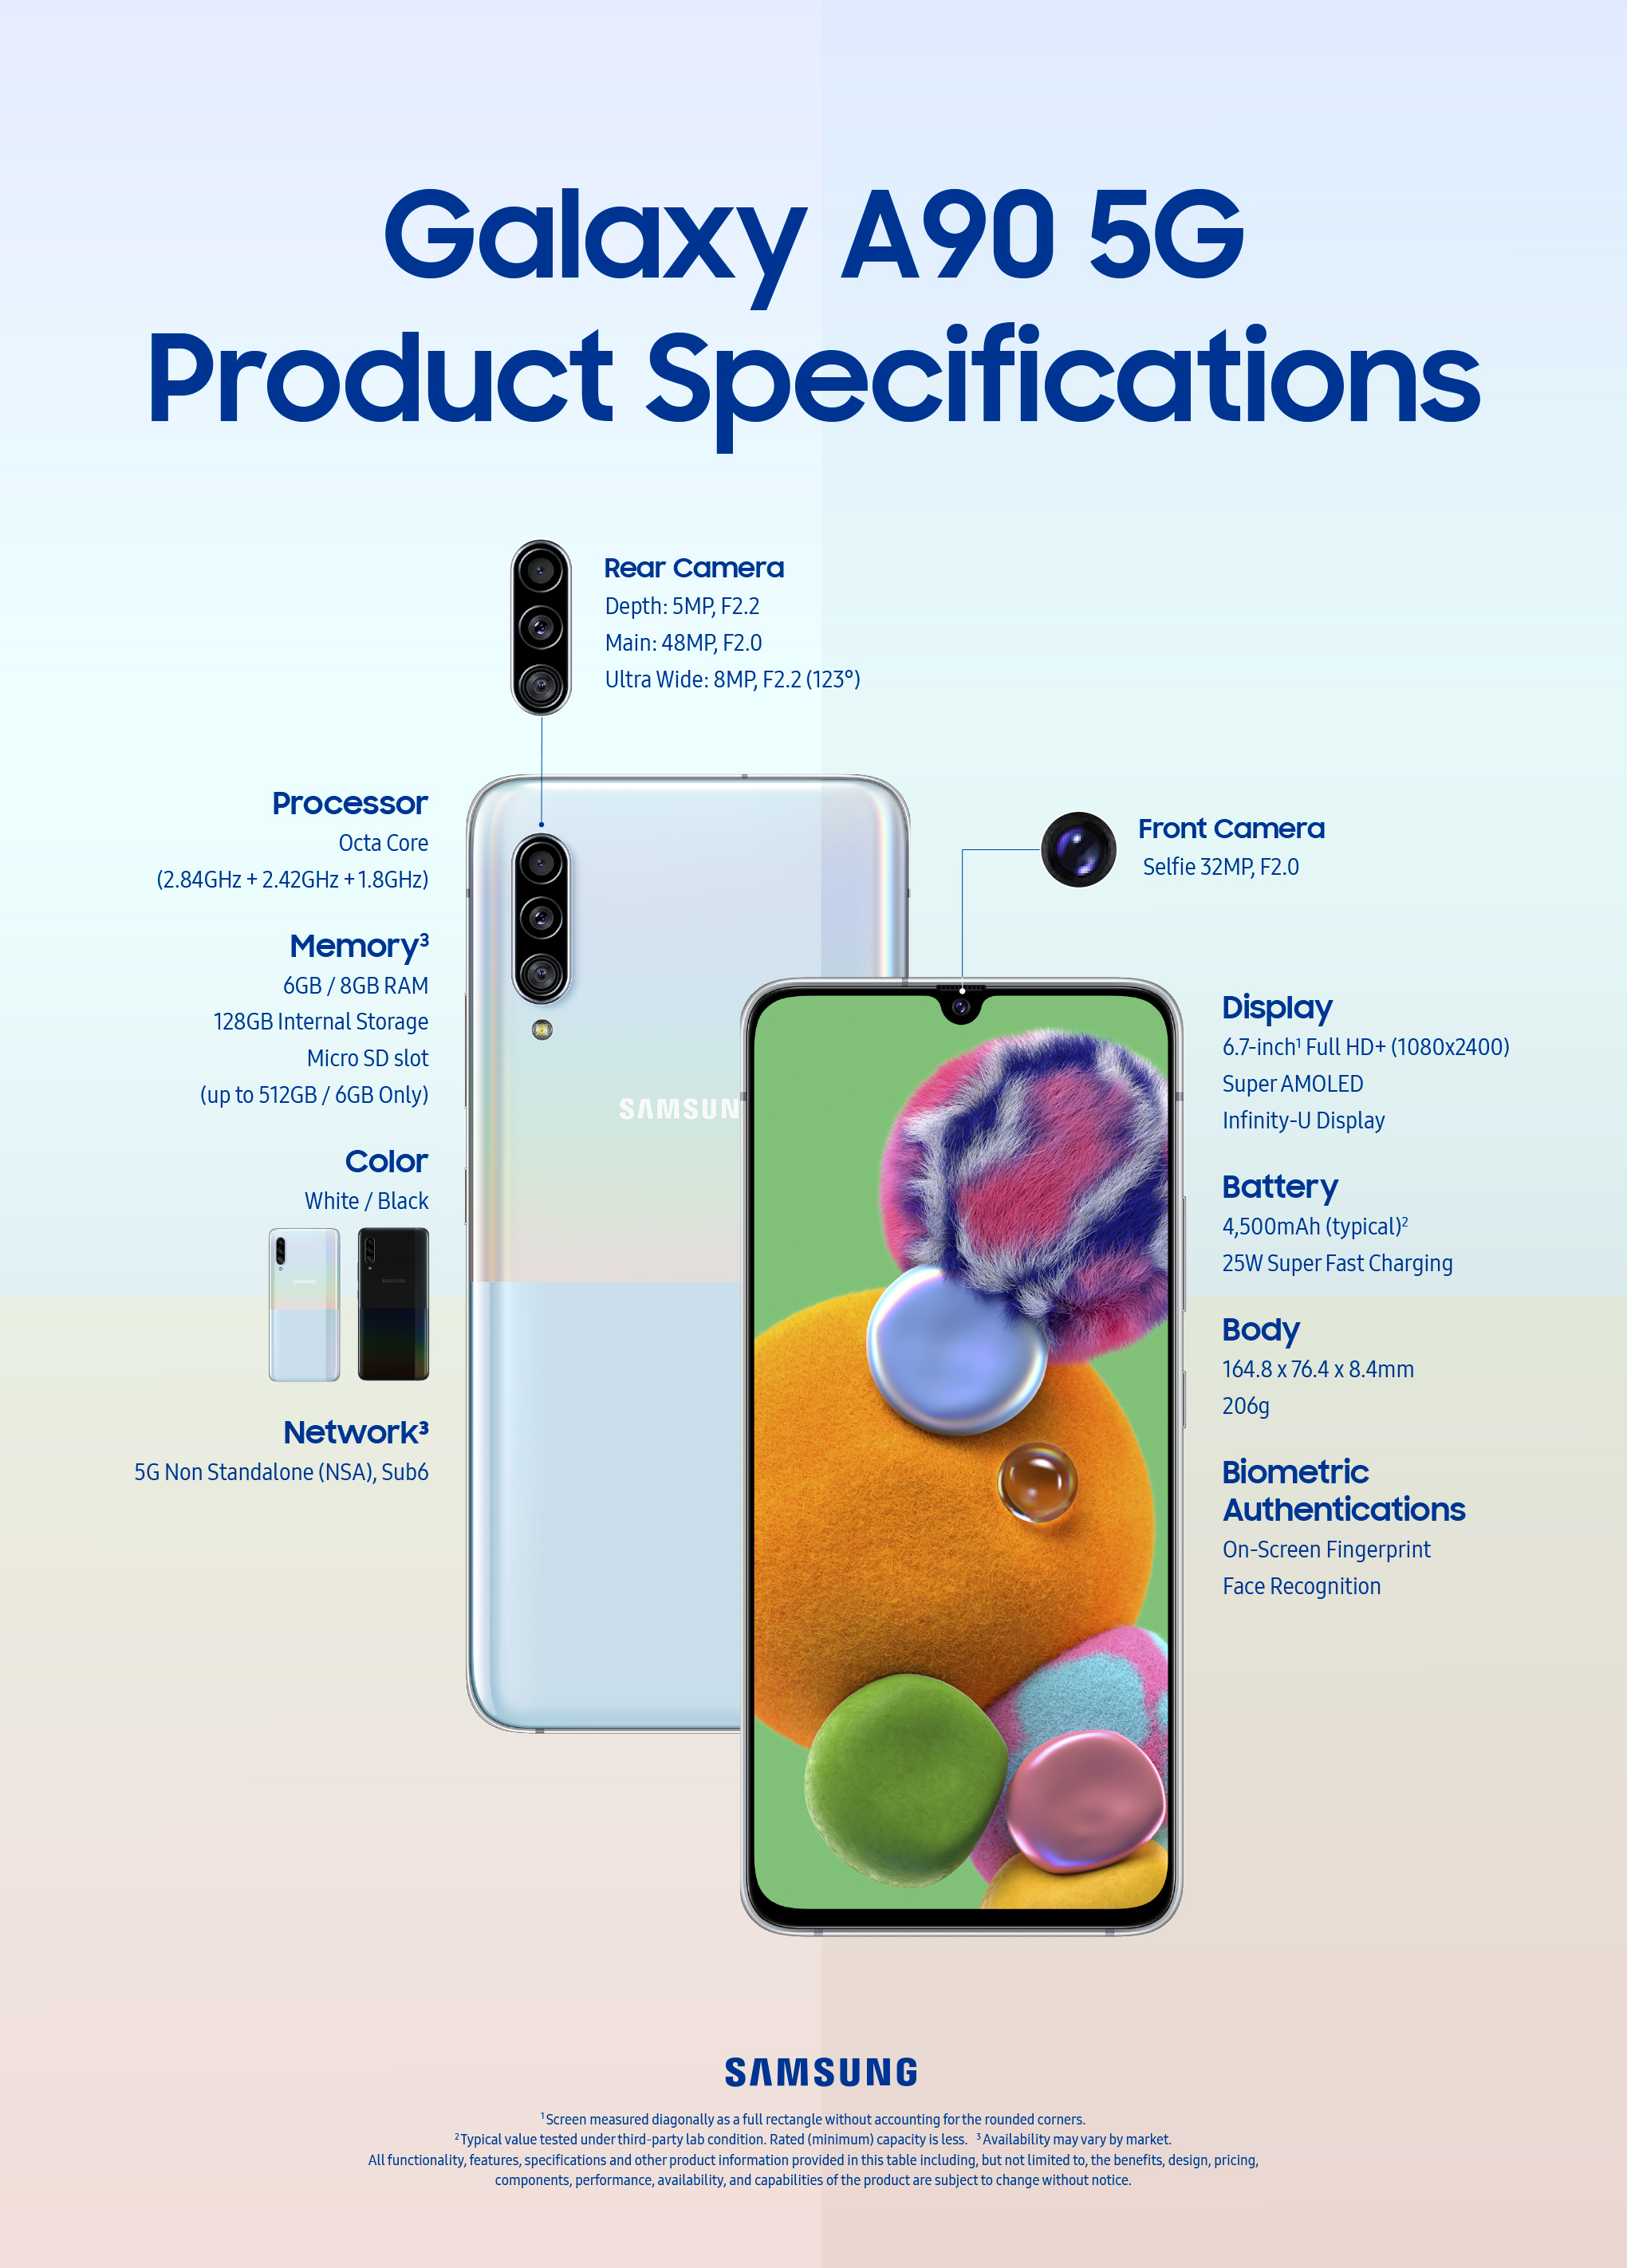 Galaxy A90 5G spec infographic